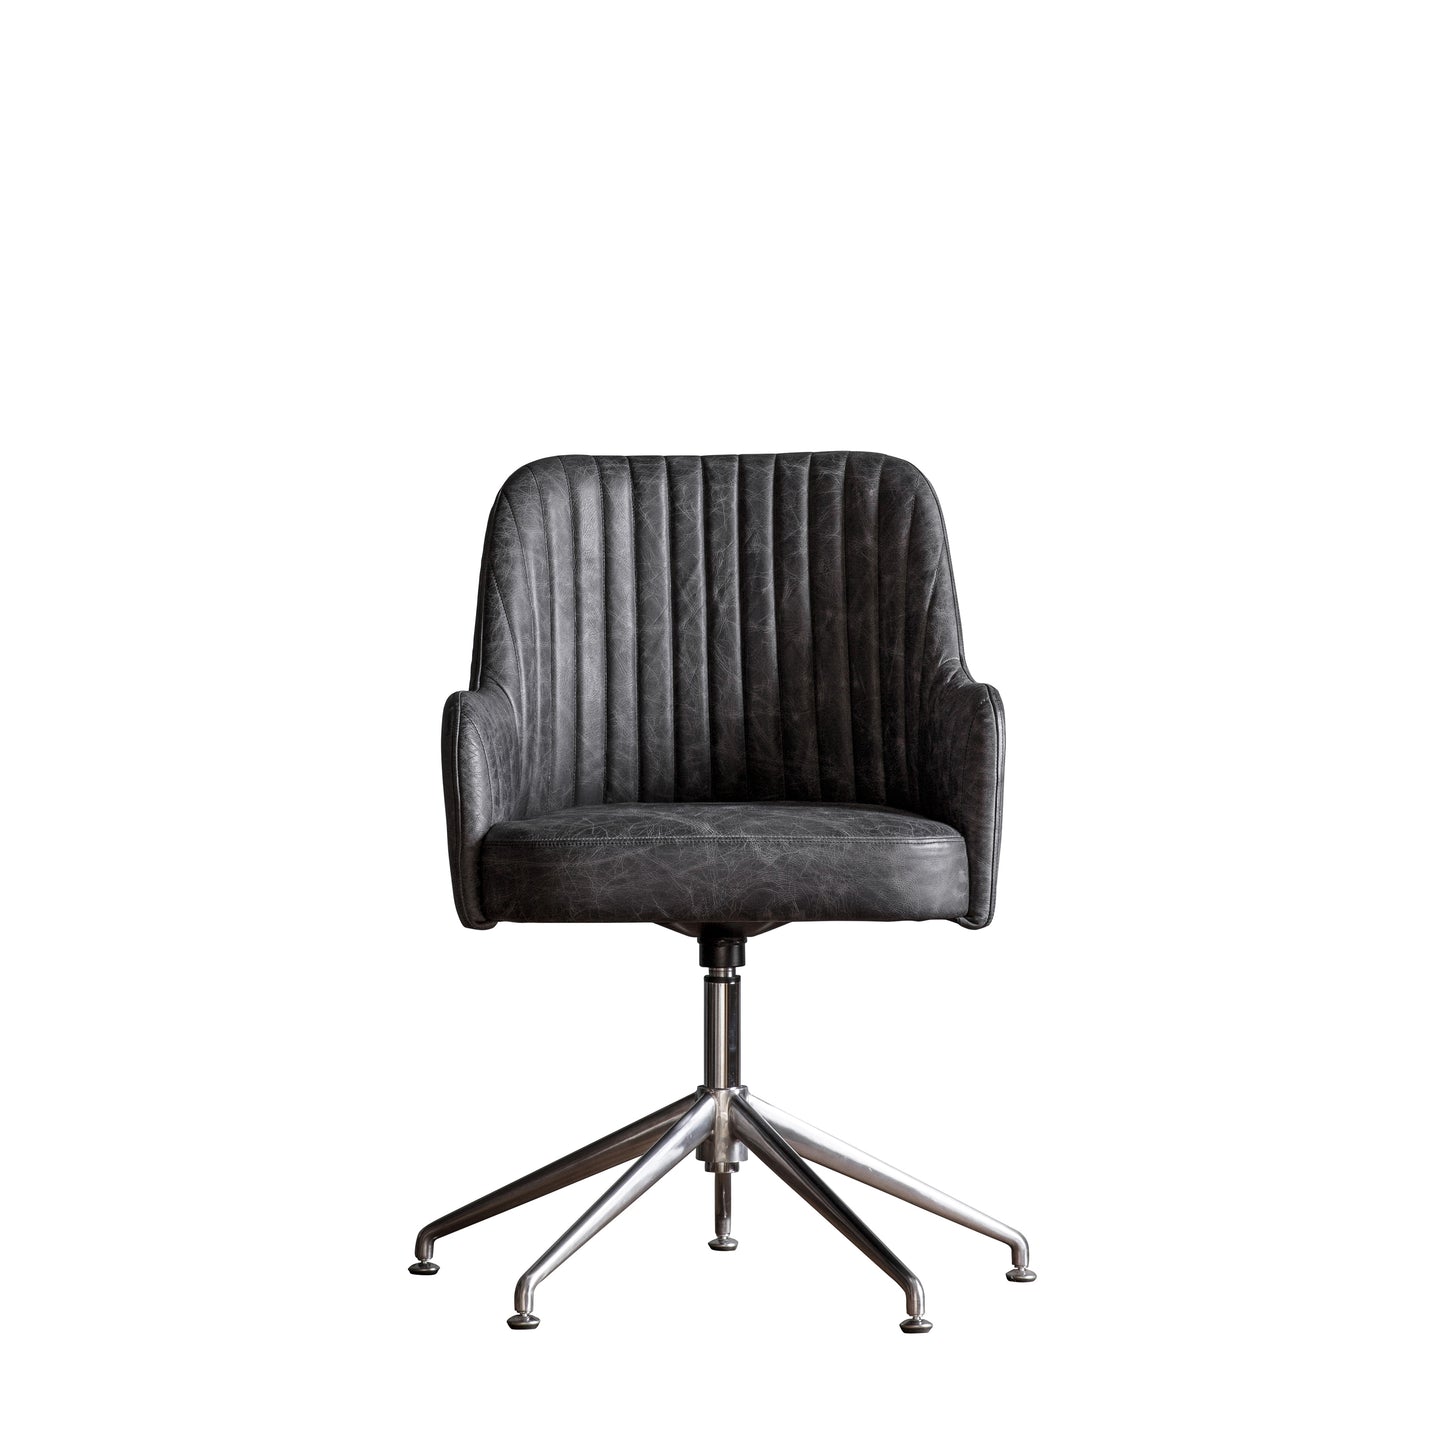 An antique ebony Curie swivel chair with black leather upholstery perfect for home furniture and interior decor.